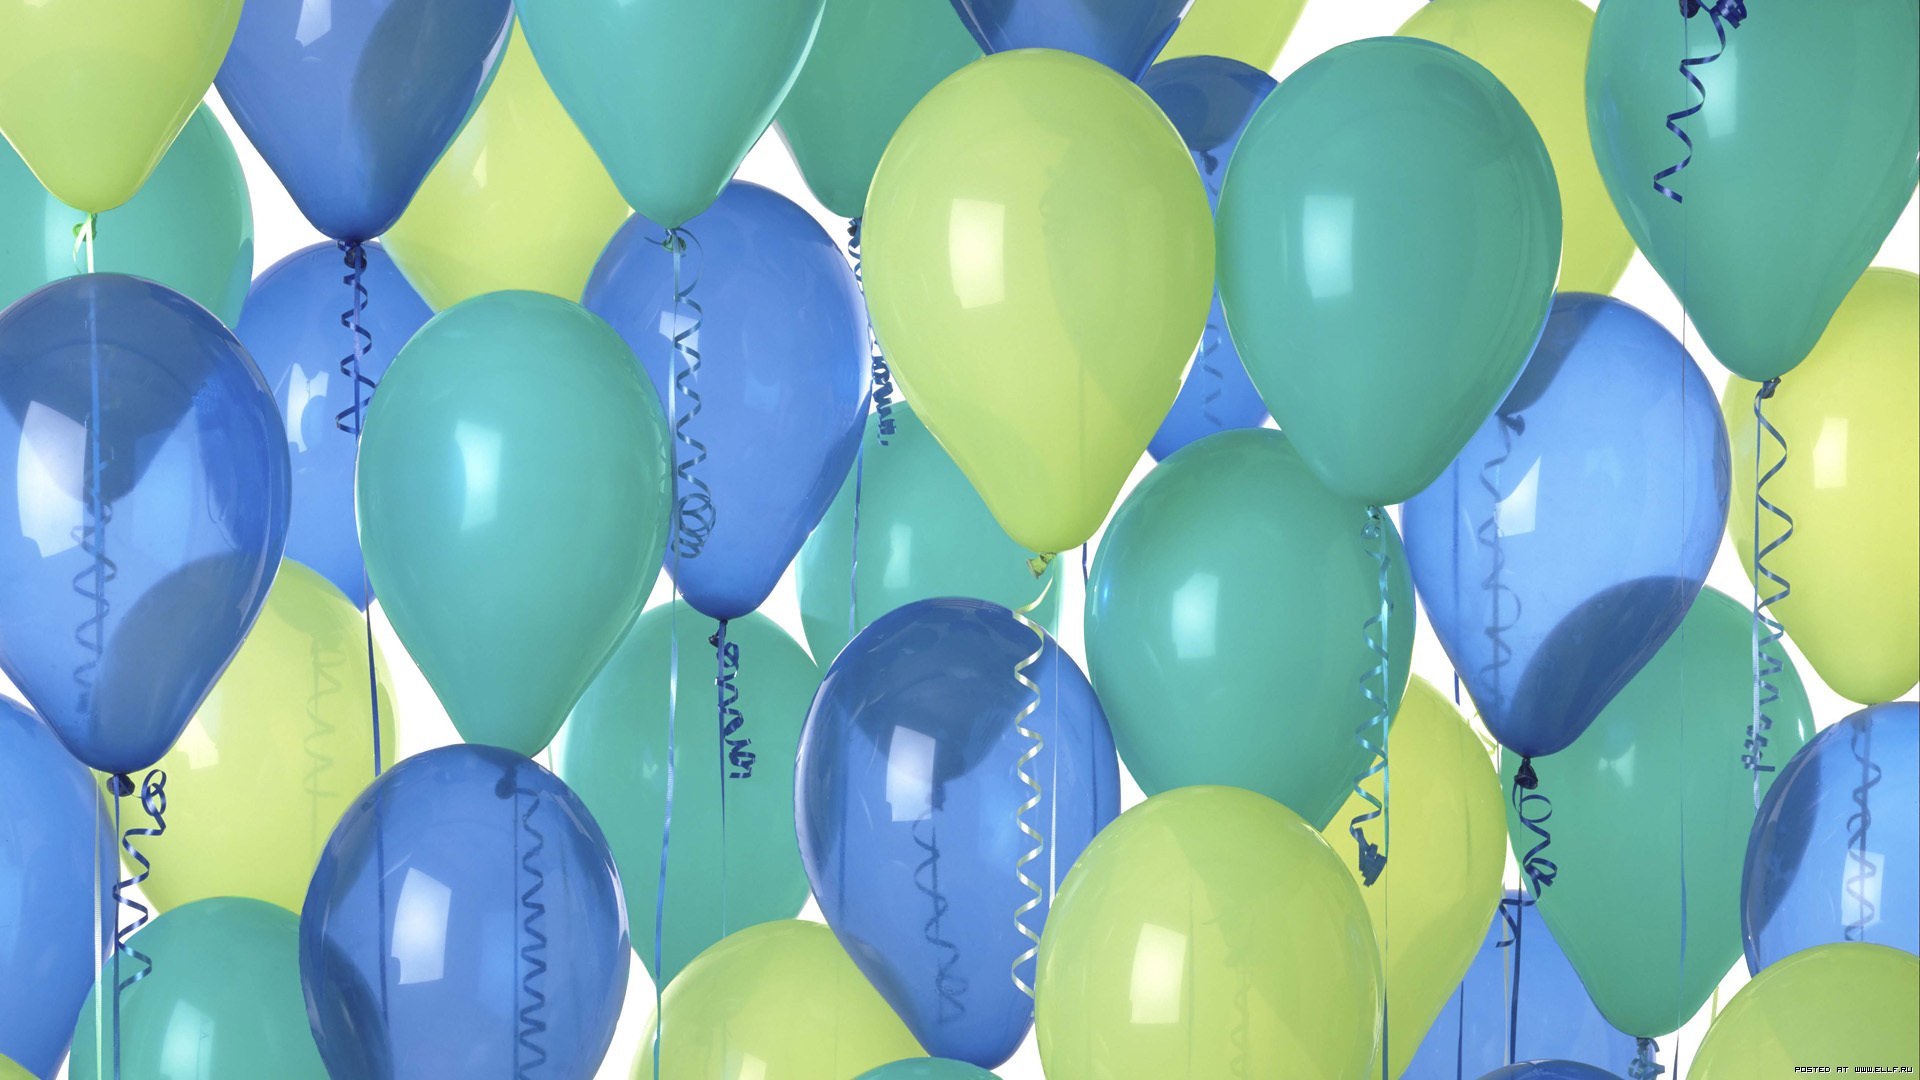 Free download wallpaper Background, Balloons on your PC desktop